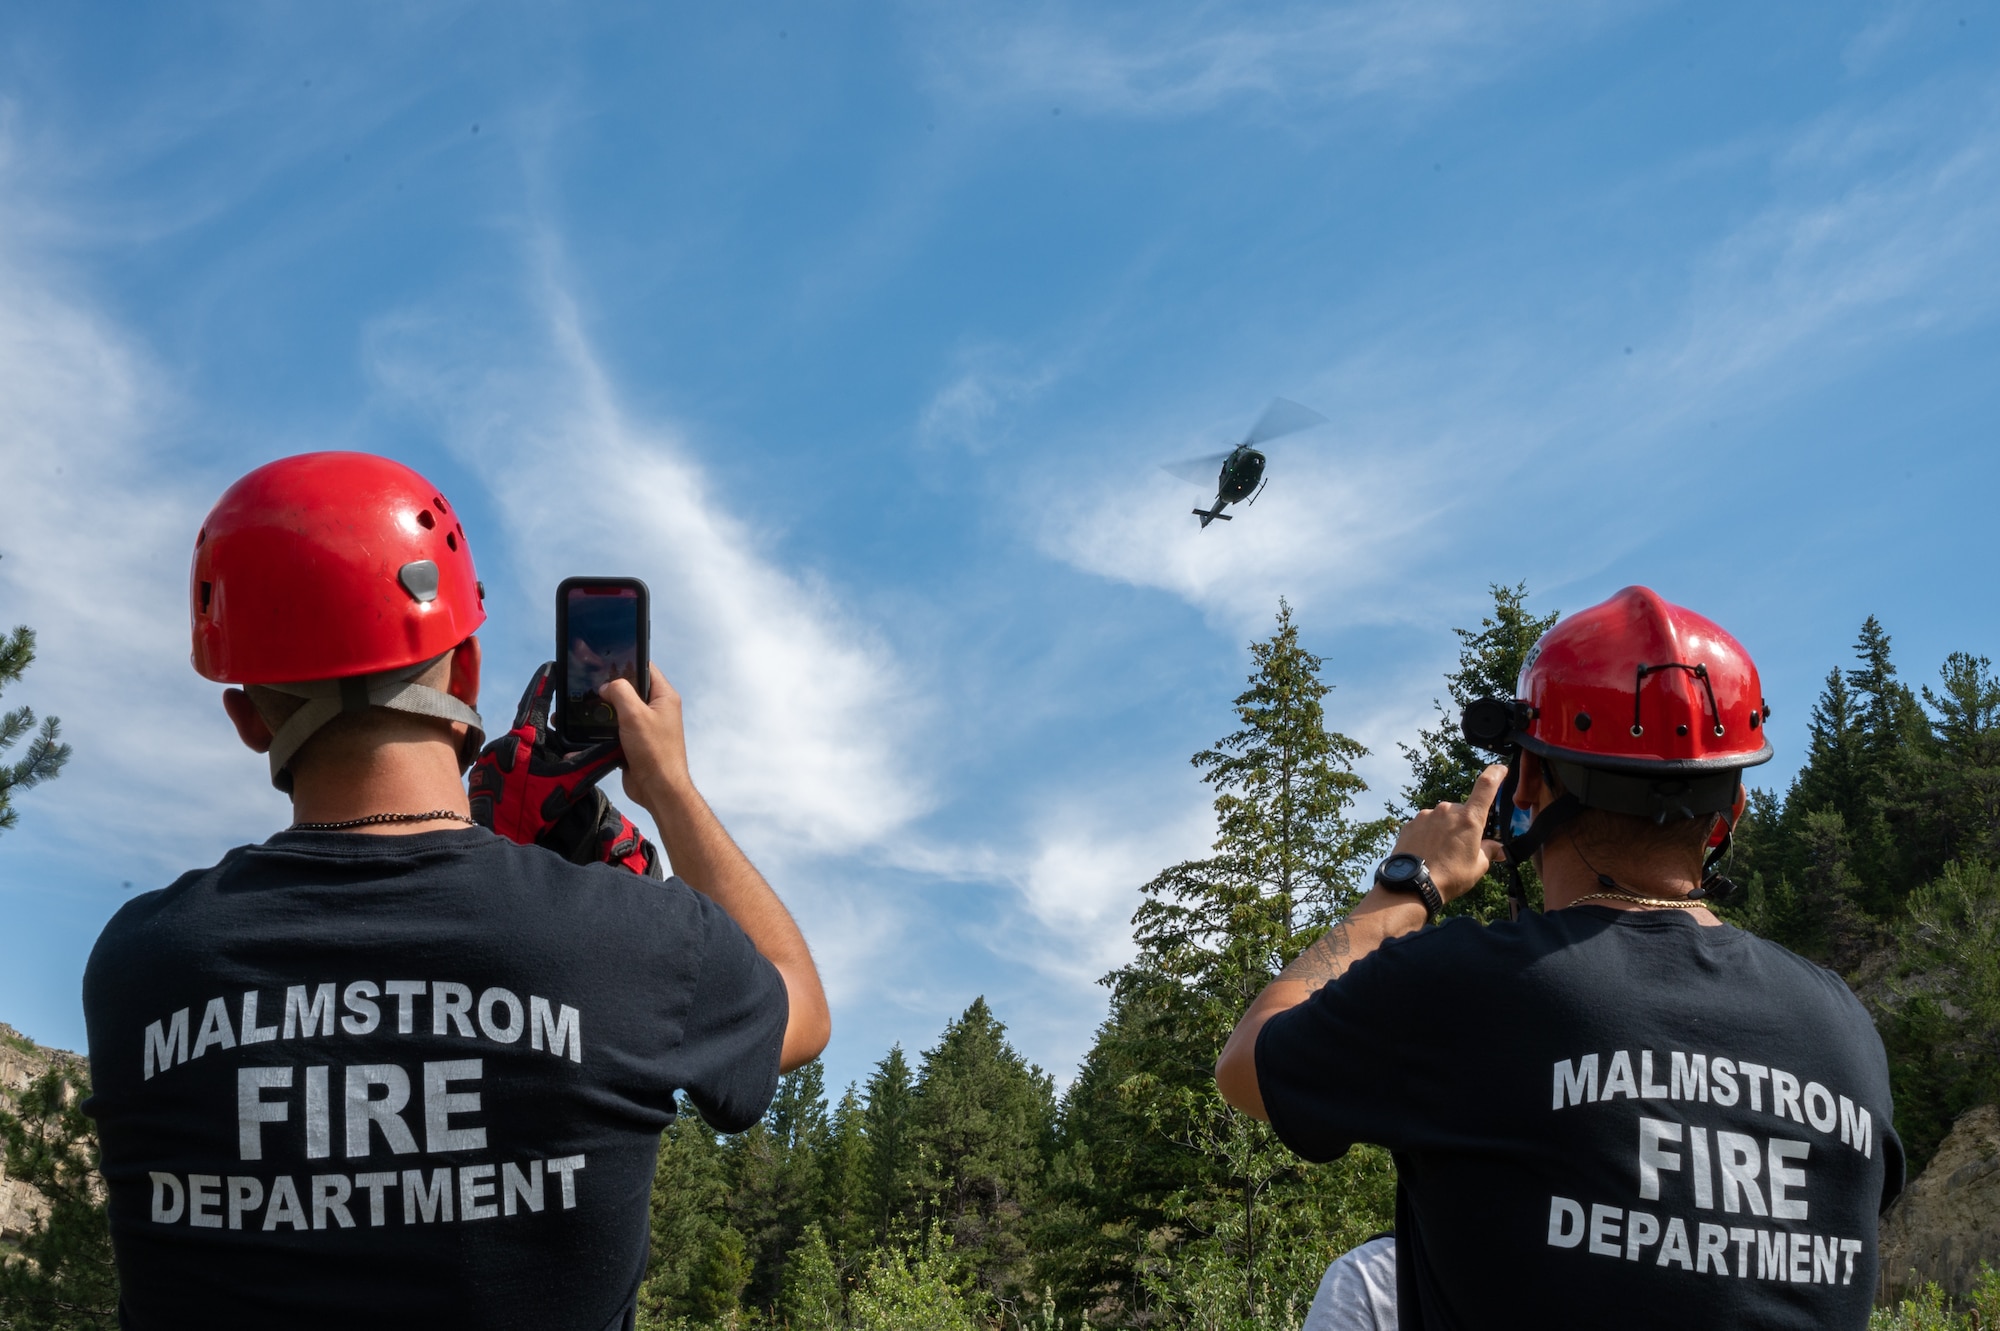 Members of the Malmstrom Fire Department take photos of a UH-N1 Huey helicopter Aug. 2, 2022, in Sluice Boxes State Park, Mont.